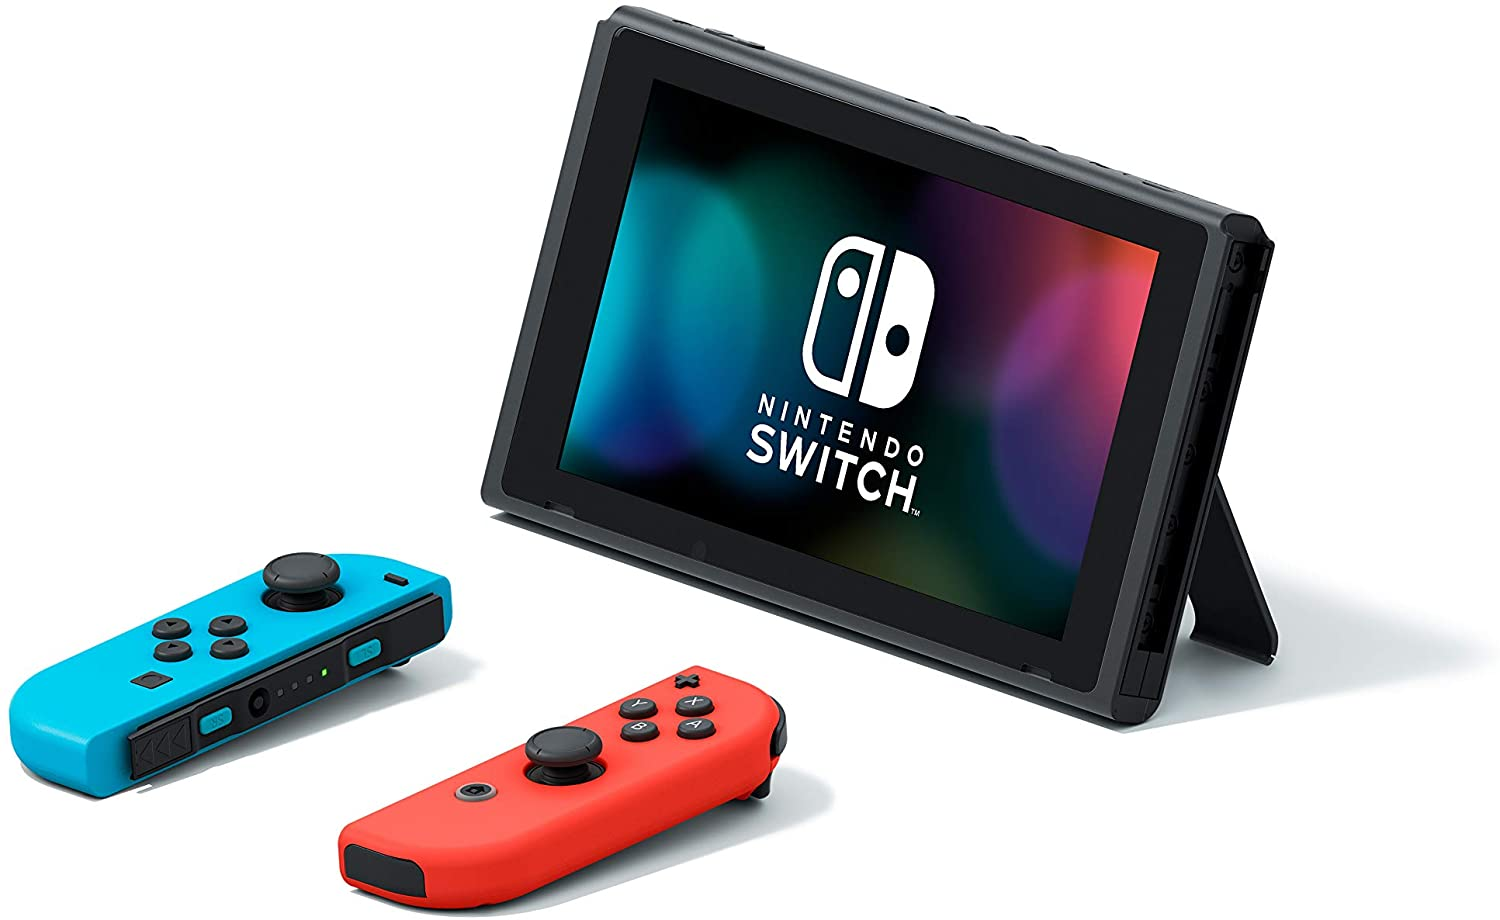 Susr9Ykj Nintendo &Nbsp; Https://Youtu.be/F5Uik5Fgiai &Lt;Ul&Gt; &Lt;Li&Gt;&Lt;Span Class=&Quot;A-List-Item&Quot;&Gt;Play Your Way With The Nintendo Switch Gaming System. Whether You’re At Home Or On The Go, Solo Or With Friends, The Nintendo Switch System Is Designed To Fit Your Life. Dock Your Nintendo Switch To Enjoy Hd Gaming On Your Tv. Heading Out? Just Undock Your Console And Keep Playing In Handheld Mode &Lt;/Span&Gt;&Lt;/Li&Gt; &Lt;Li&Gt;&Lt;Span Class=&Quot;A-List-Item&Quot;&Gt; This Model Includes Battery Life Of Approximately 4.5 To 9 Hours &Lt;/Span&Gt;&Lt;/Li&Gt; &Lt;Li&Gt;&Lt;Span Class=&Quot;A-List-Item&Quot;&Gt; The Battery Life Will Depend On The Games You Play. For Instance, The Battery Will Last Approximately 5.5 Hours For The Legend Of Zelda: Breath Of The Wild (Games Sold Separately) &Lt;/Span&Gt;&Lt;/Li&Gt; &Lt;/Ul&Gt; &Nbsp; Nintendo Switch V2 With Neon Blue And Neon Red Joy‑Con 32Gb Gaming Console